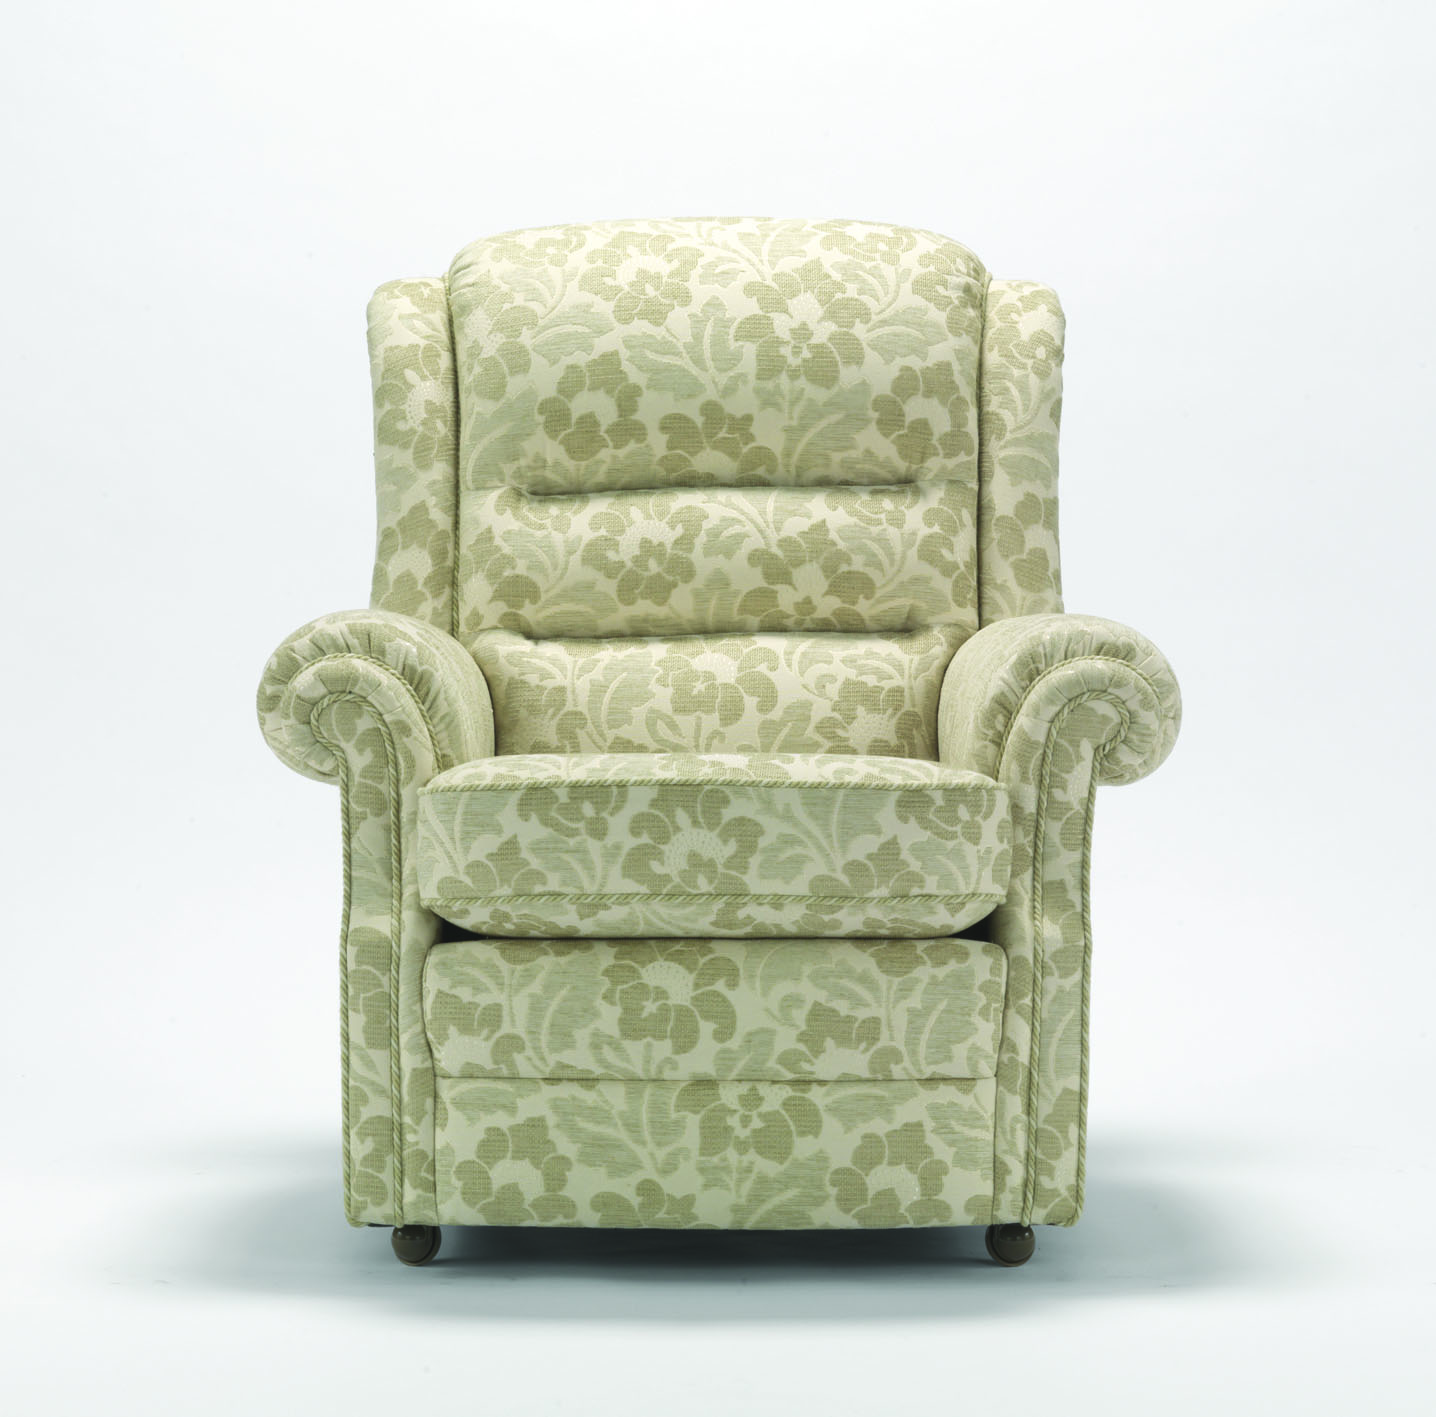 VALE LINCOLN CHAIR